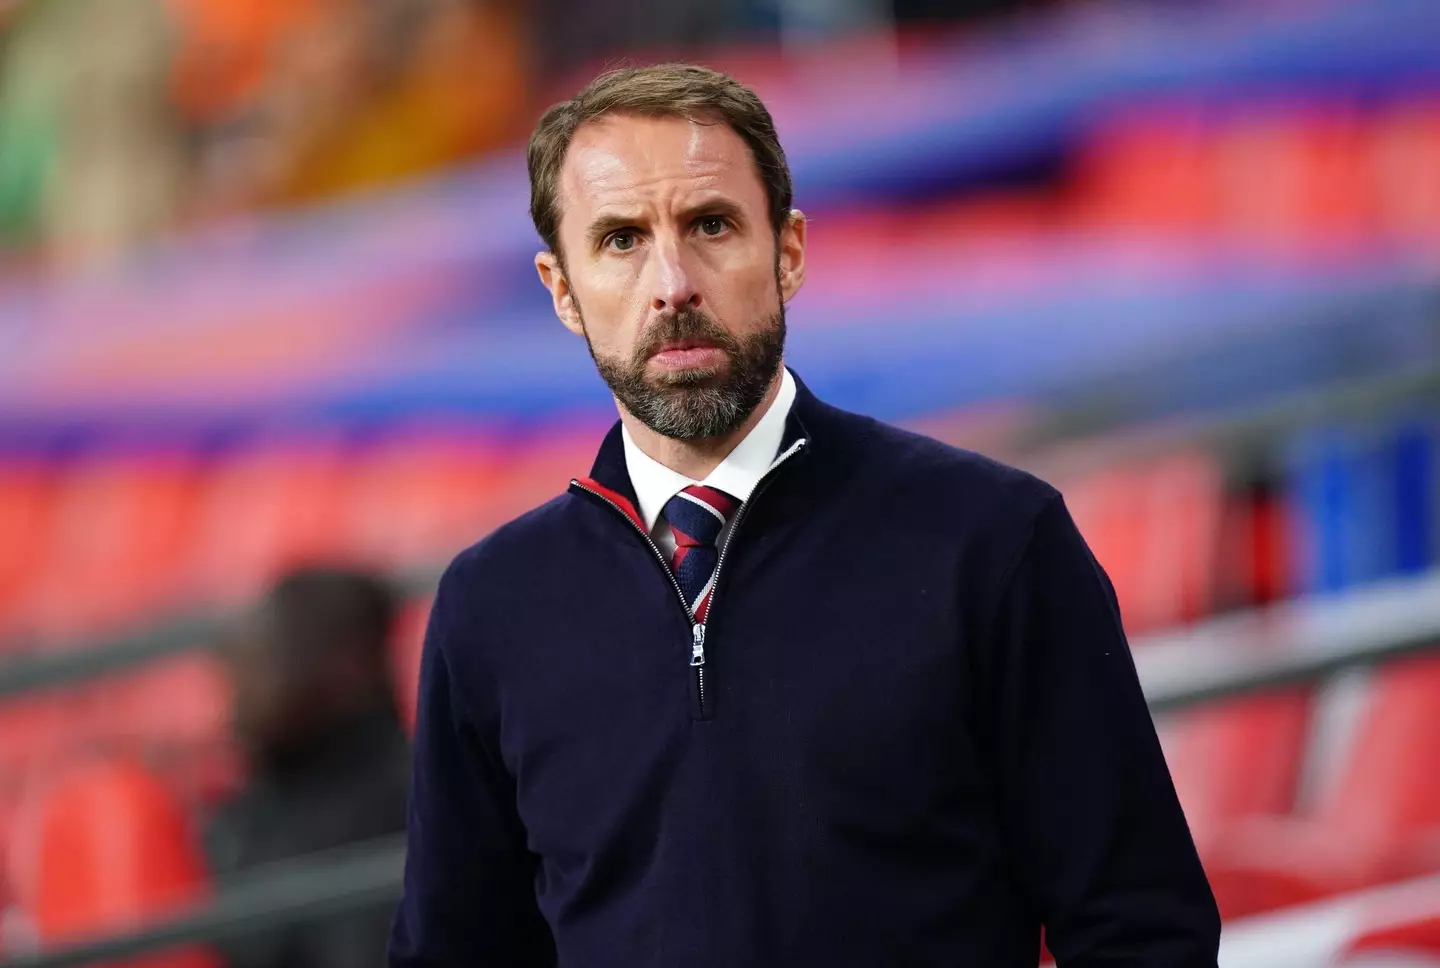 Peter Crouch says England boss Gareth Southgate should play a back three in Qatar (Image: PA)